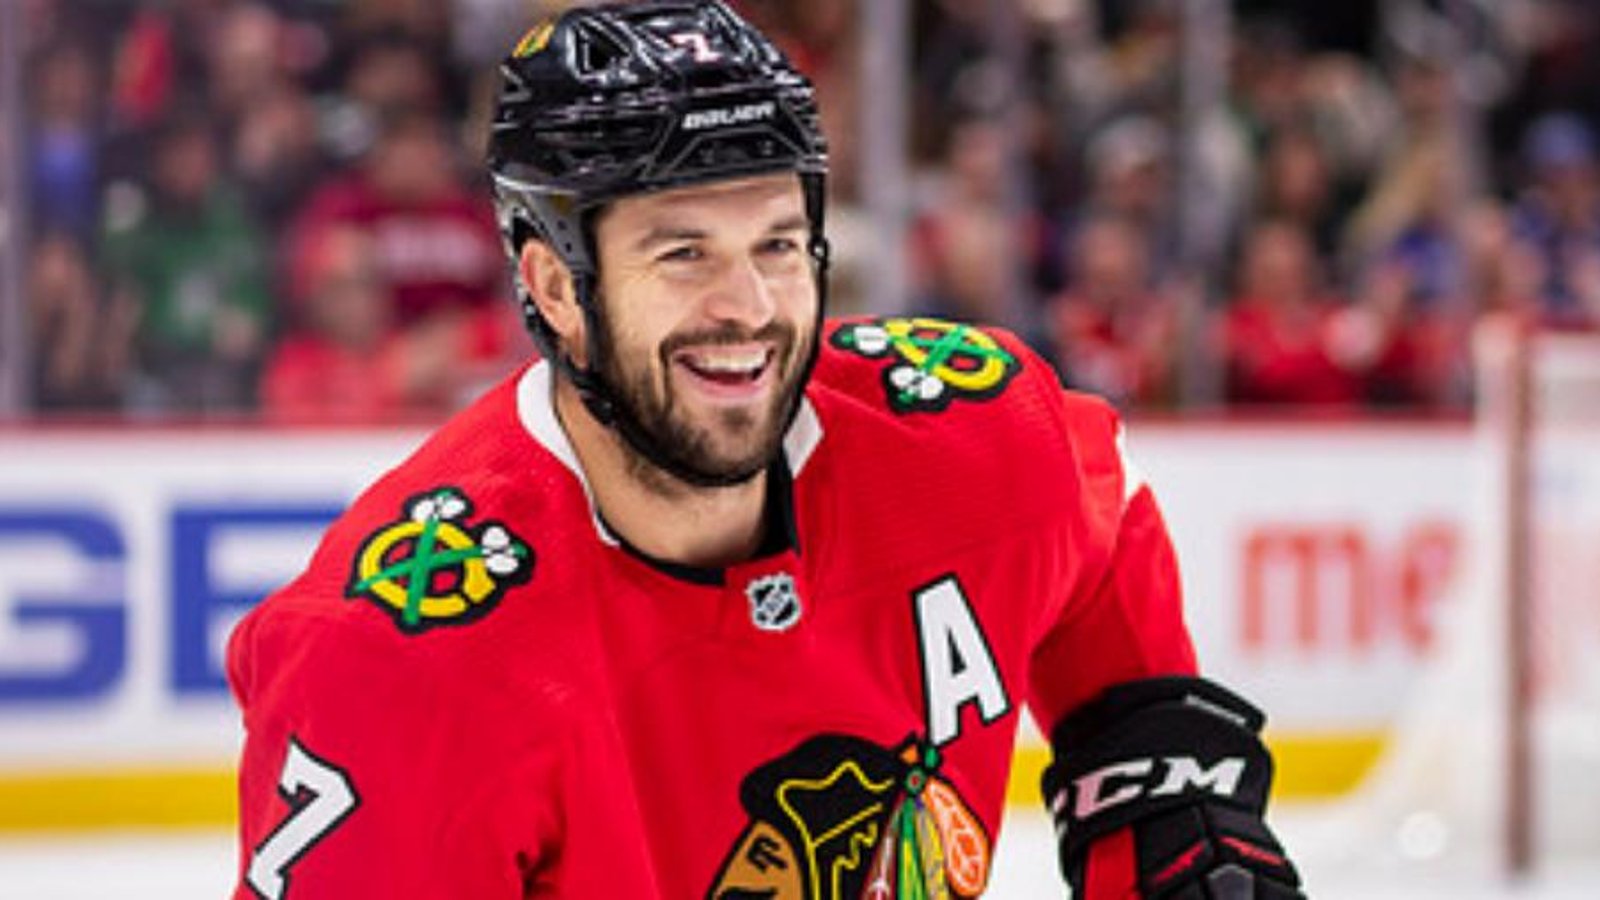 Chicago Blackhawks could be getting Brent Seabrook back for playoffs